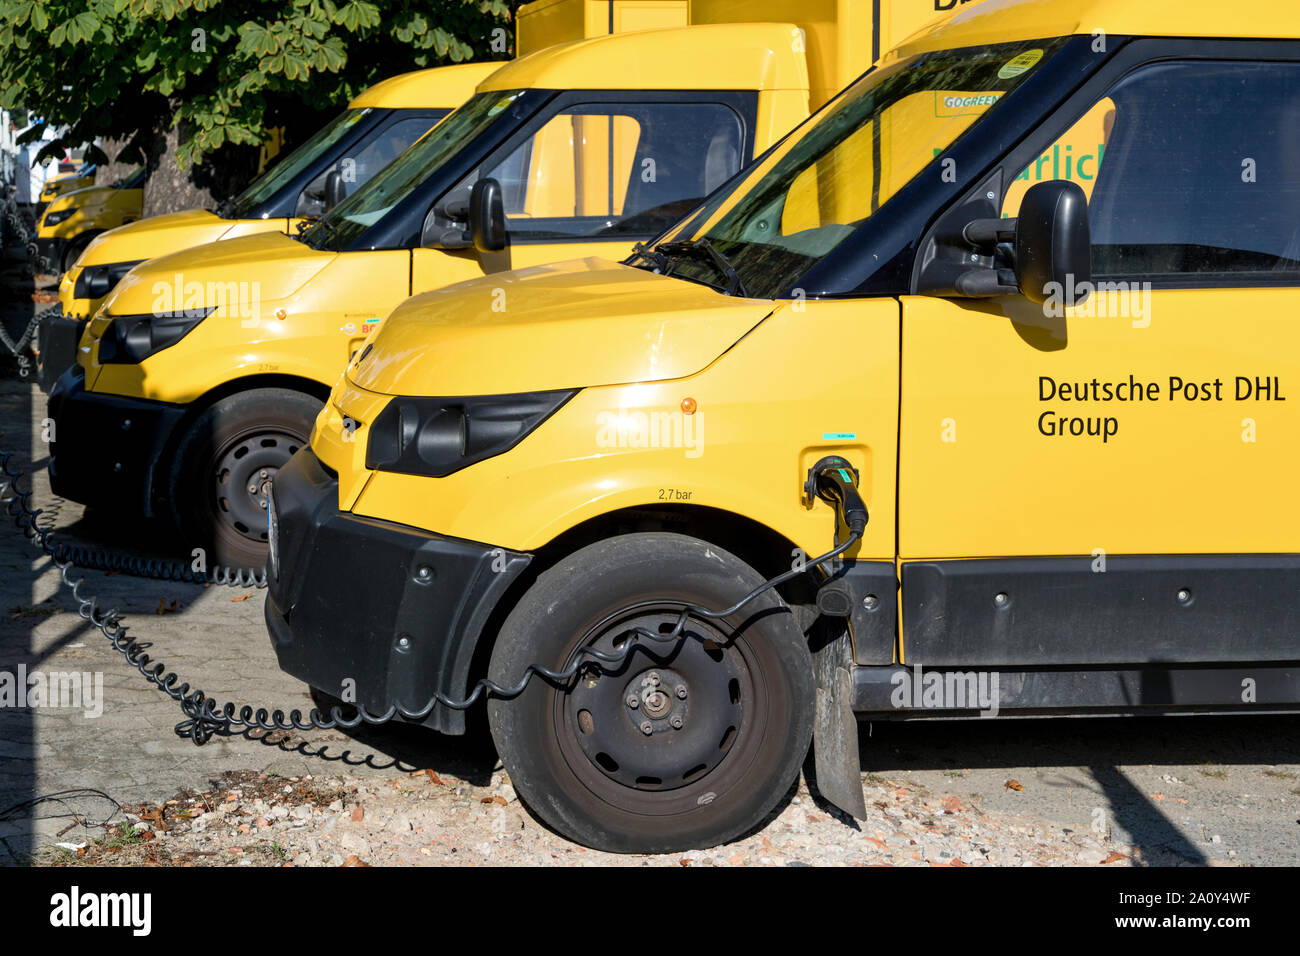 StreetScooter Work of Deutsche Post DHL being charged. Stock Photo